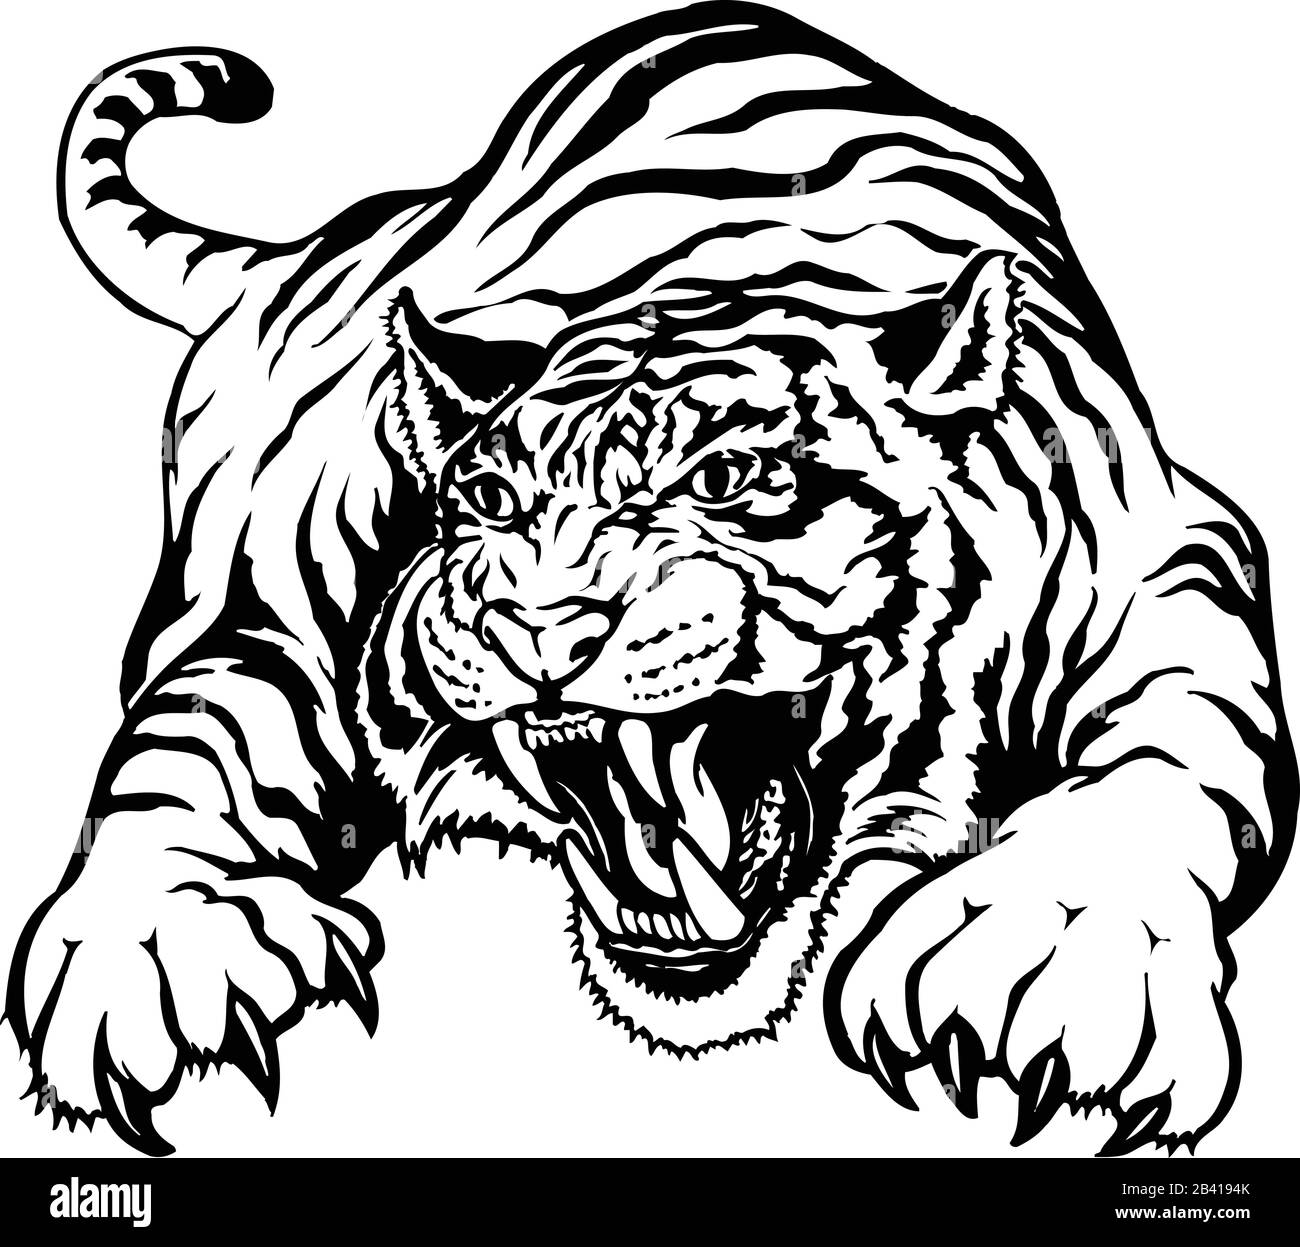 Angry Tiger Vector Illustration Stock Vector